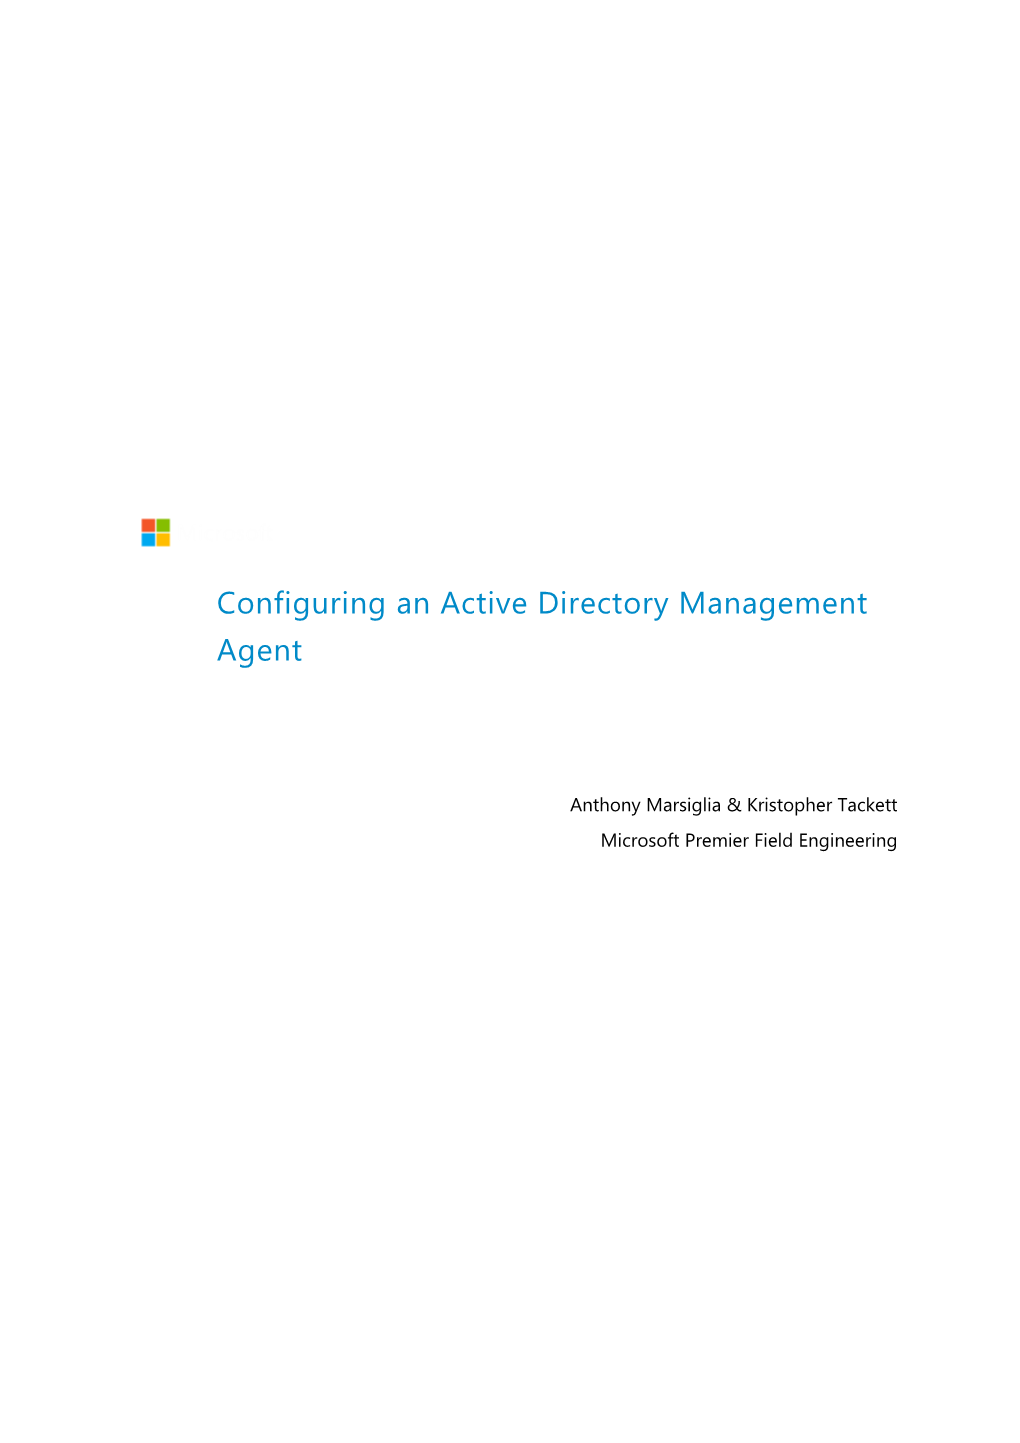 Configuring an Active Directory Management Agent